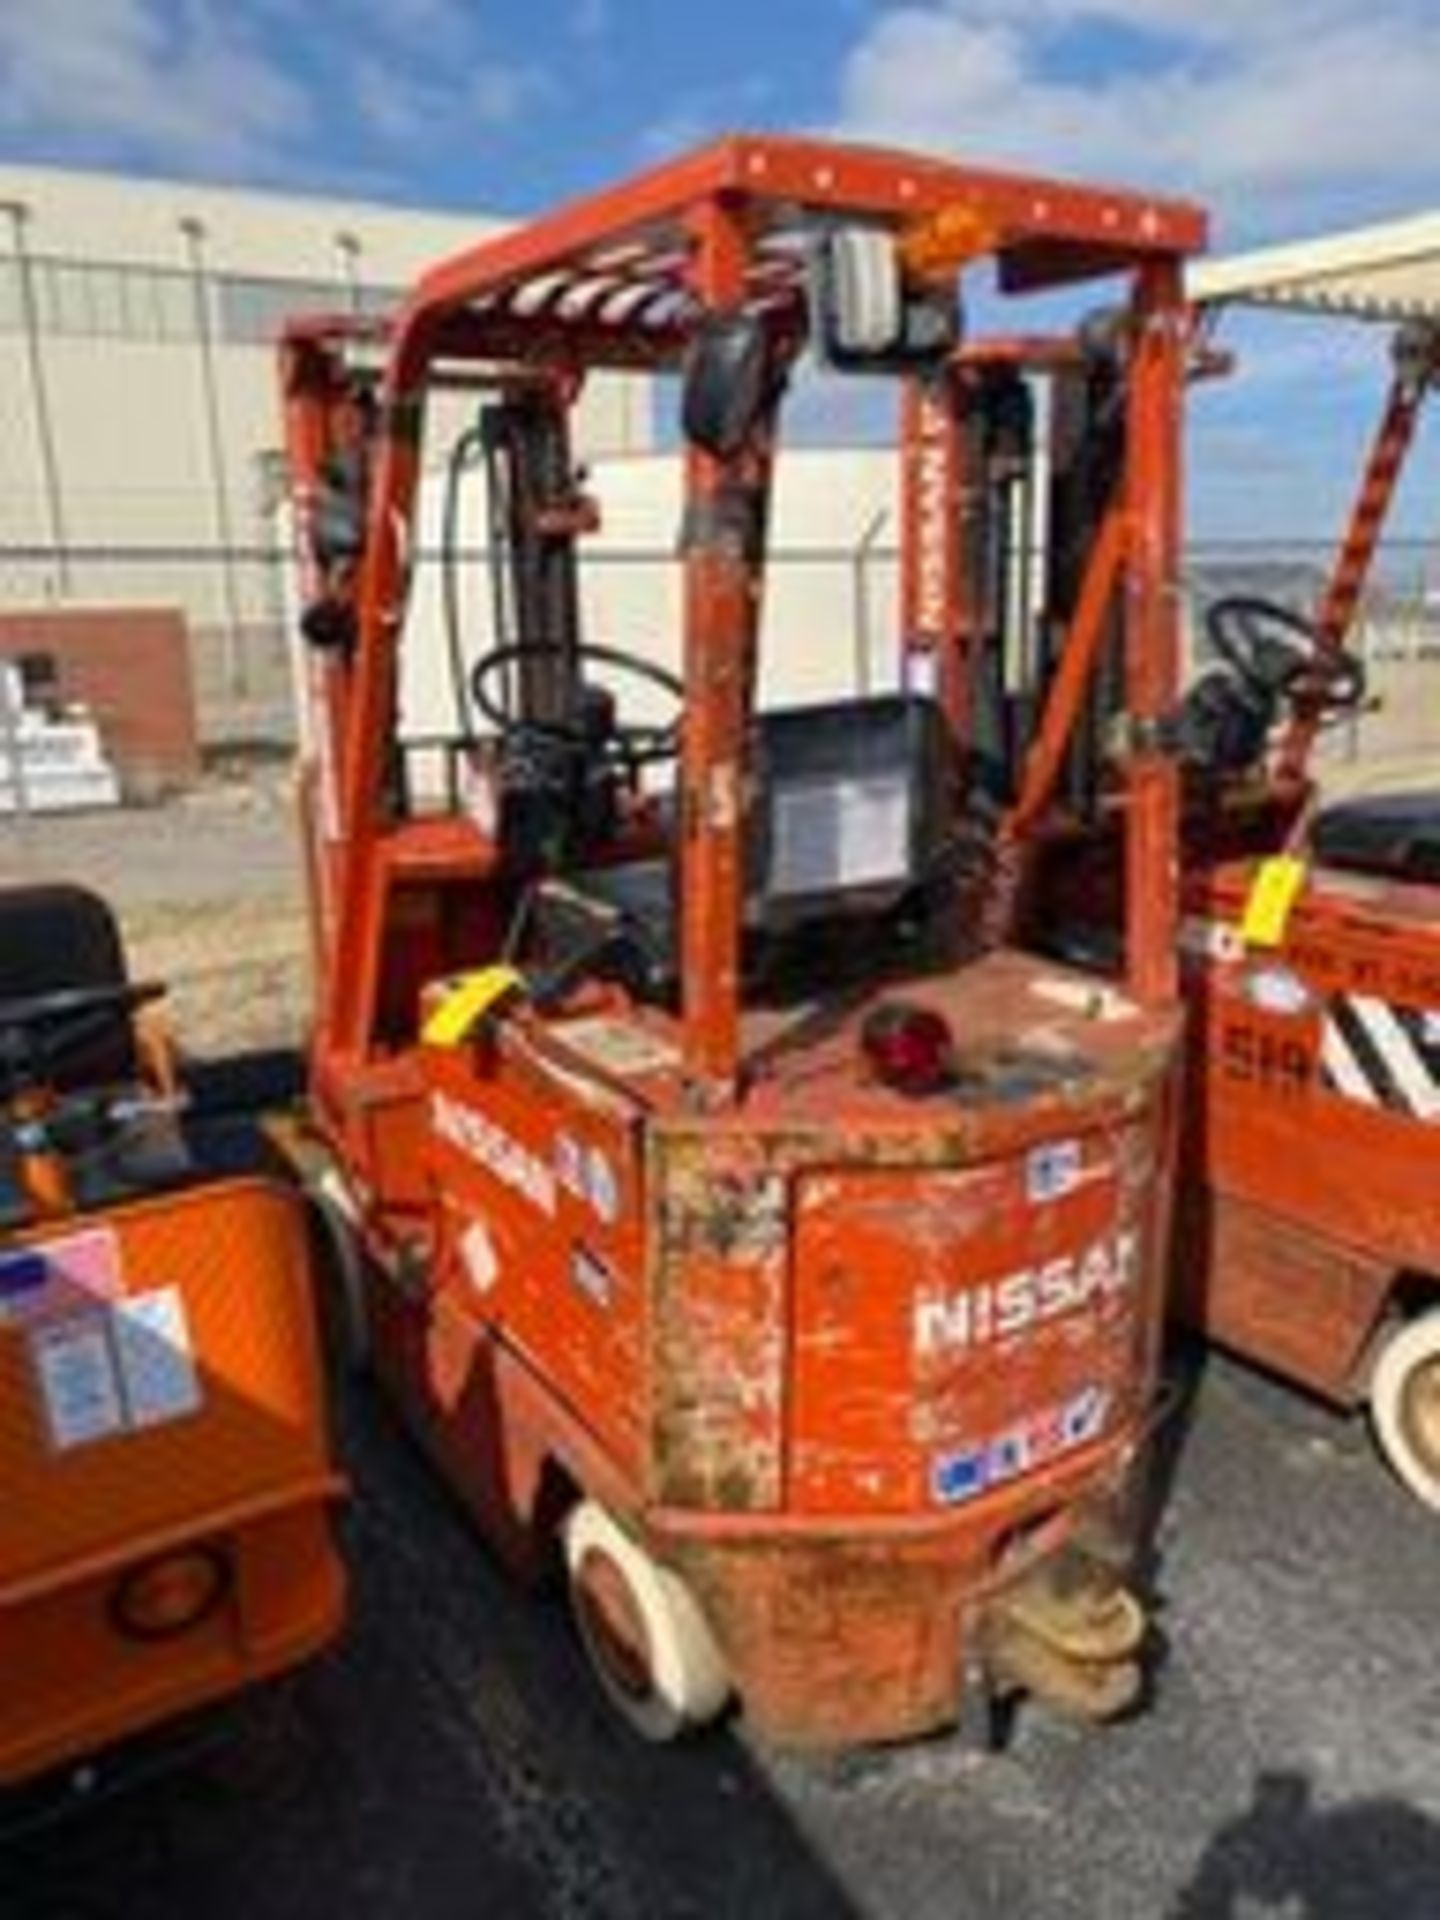 Nissan Forklift, Model #CUBO1L15E, Chassis No. #CUB01-001226, Truck Weight W/ Battery = 6219 Lb - Image 2 of 9